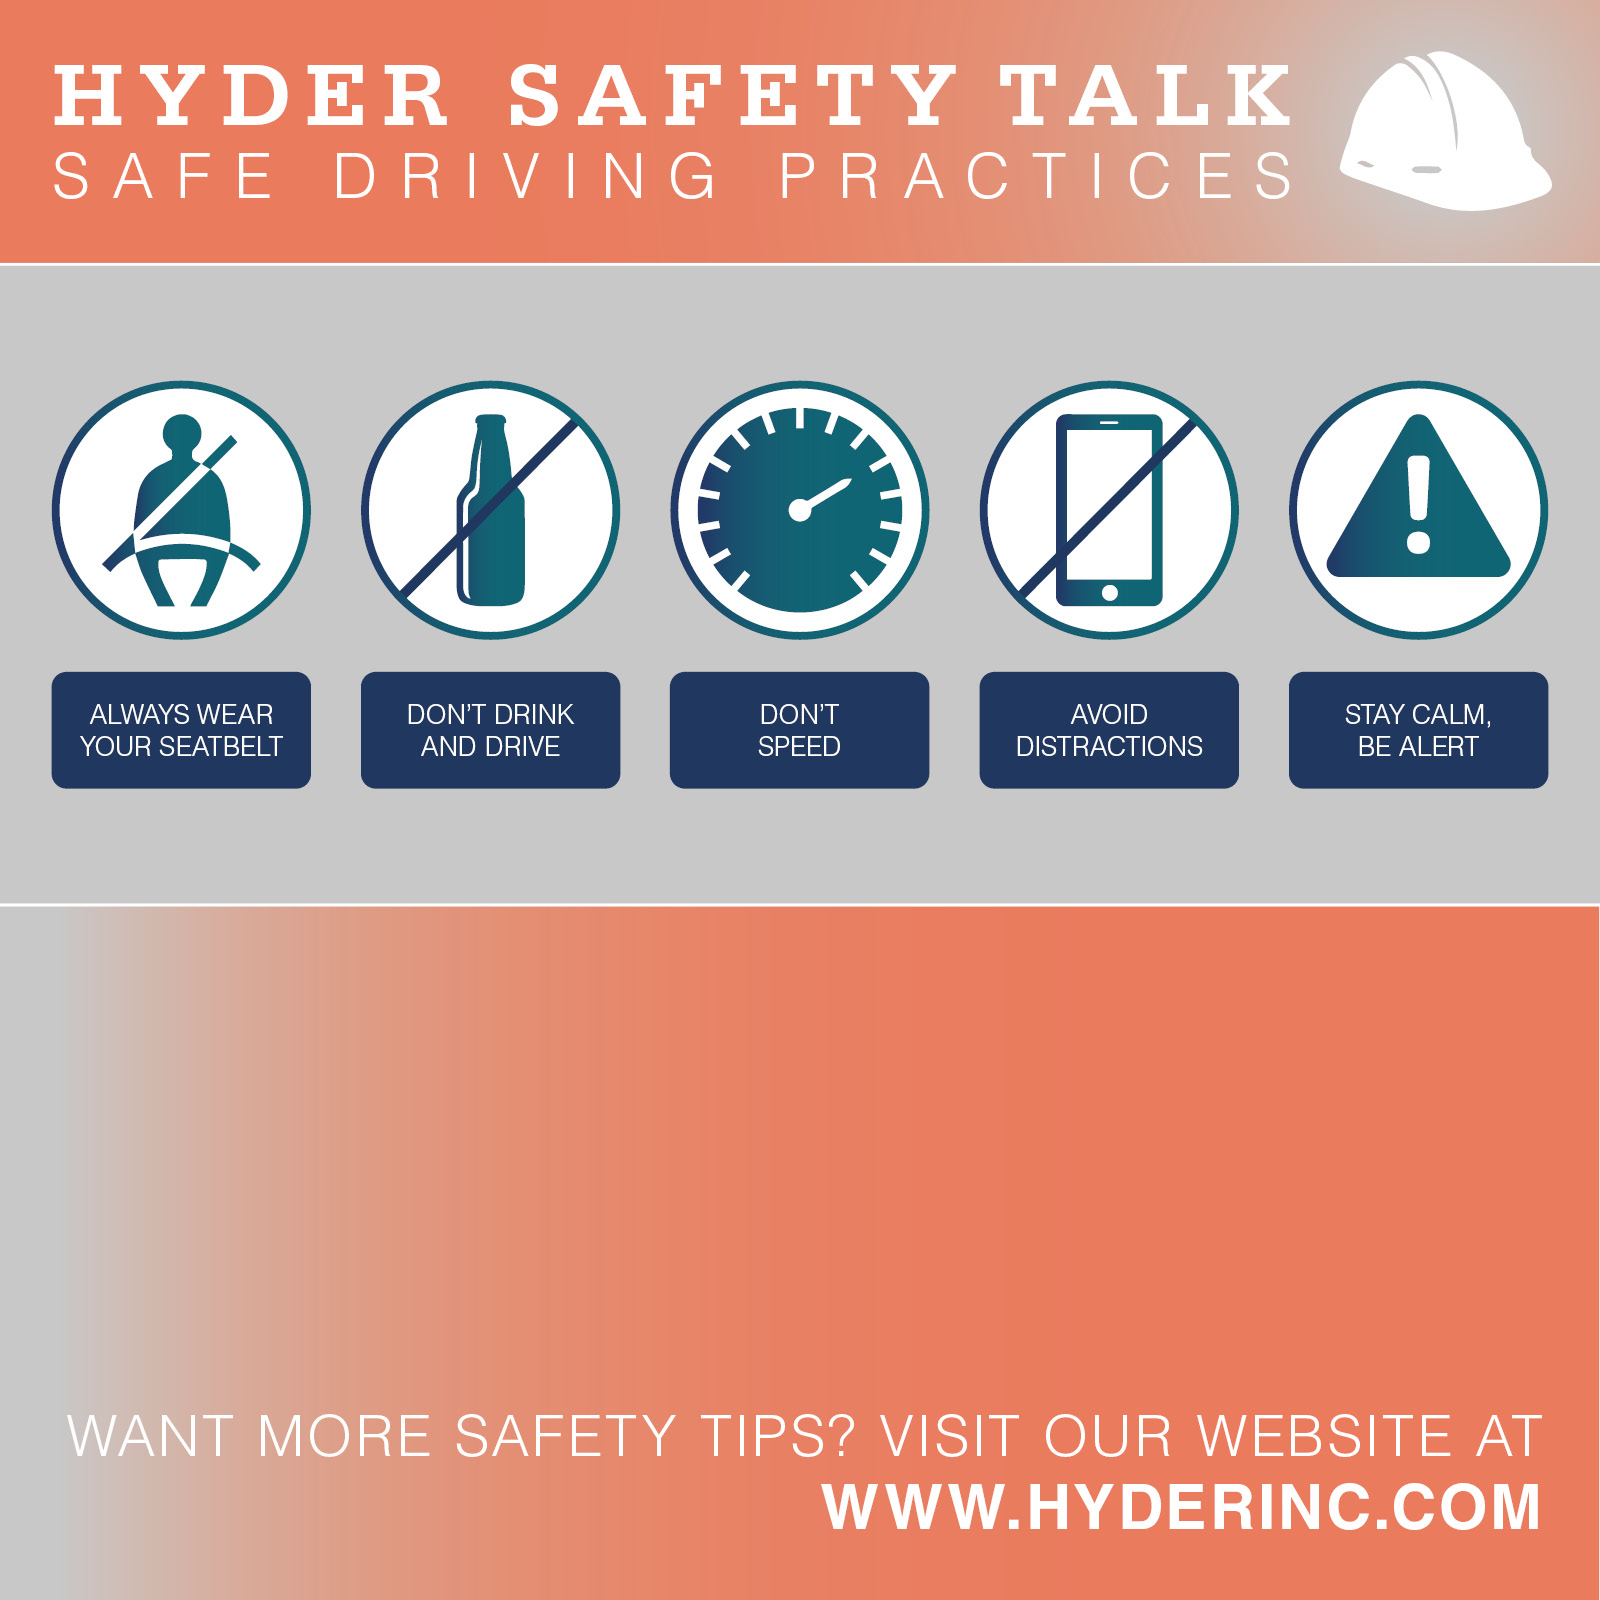 Safety Talk Safe Driving Practices Hyder Construction